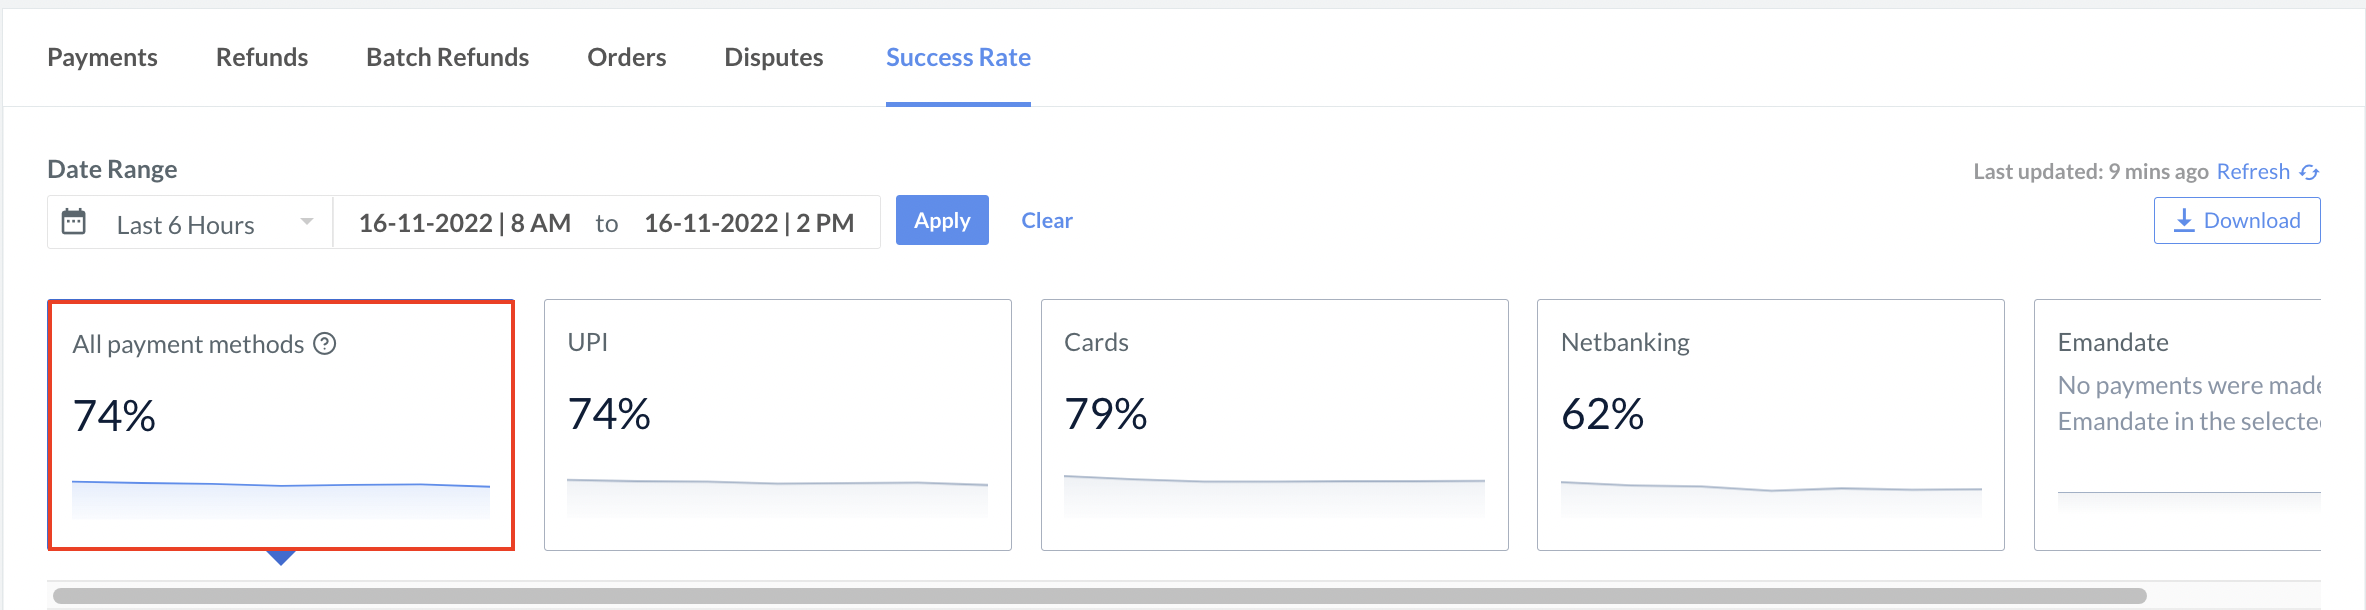 core success rate dashboard all methods